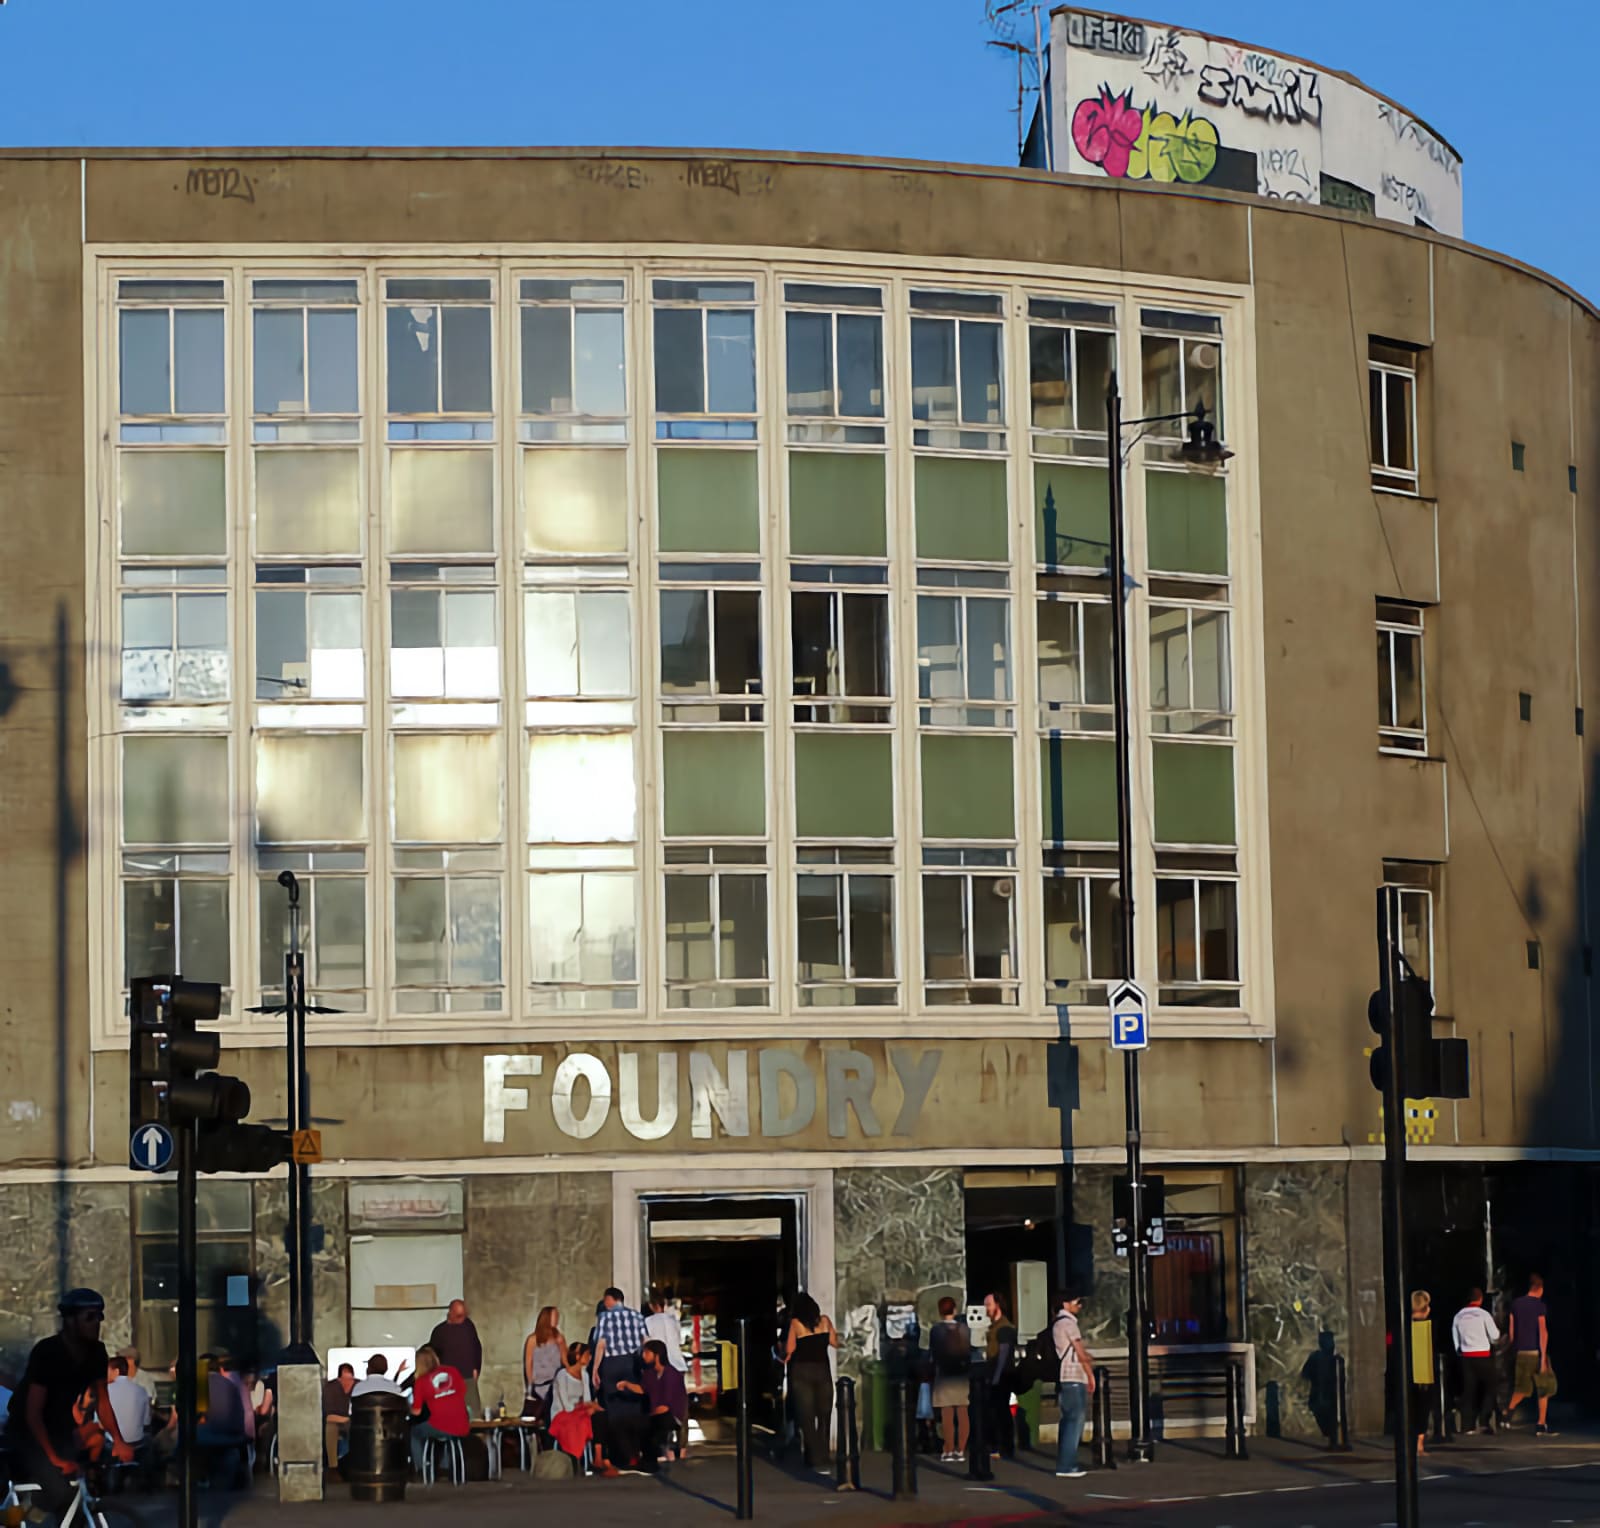 The Foundry, Old Street